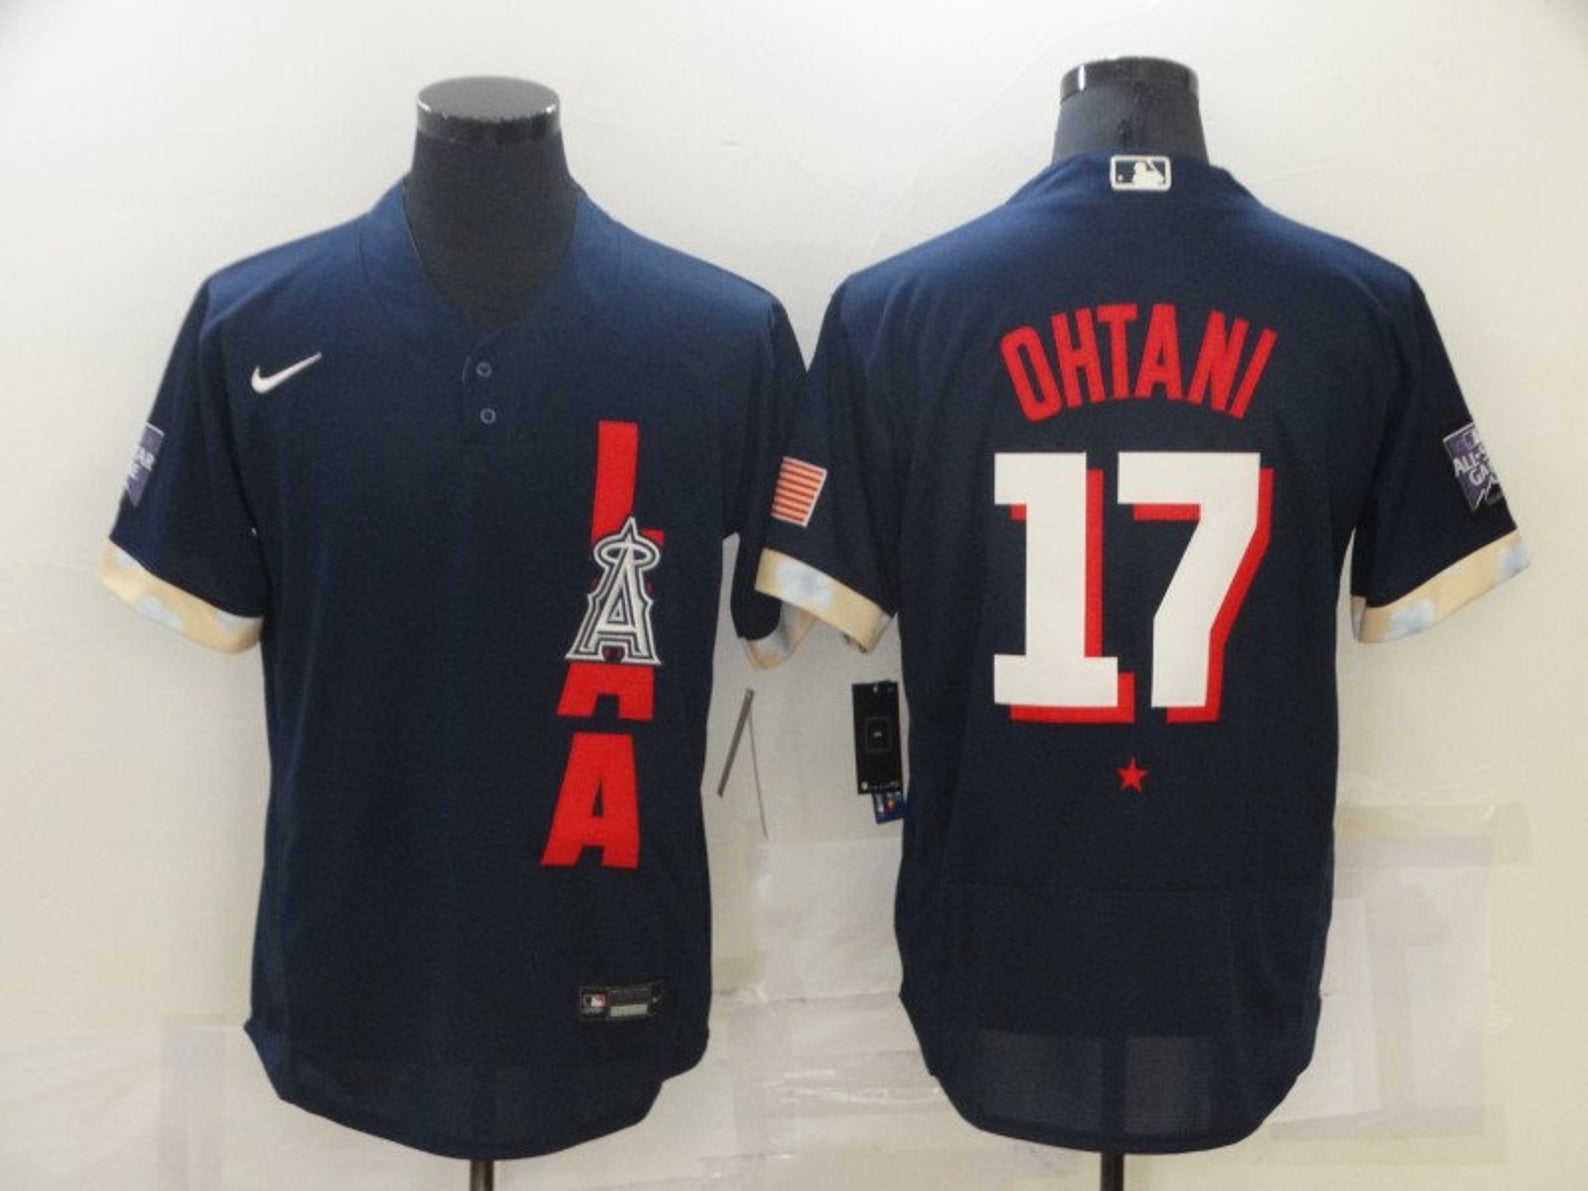 Shohei Ohtani 17 Los Angeles Angels 2021 MLB All-Star Game Navy Jersey